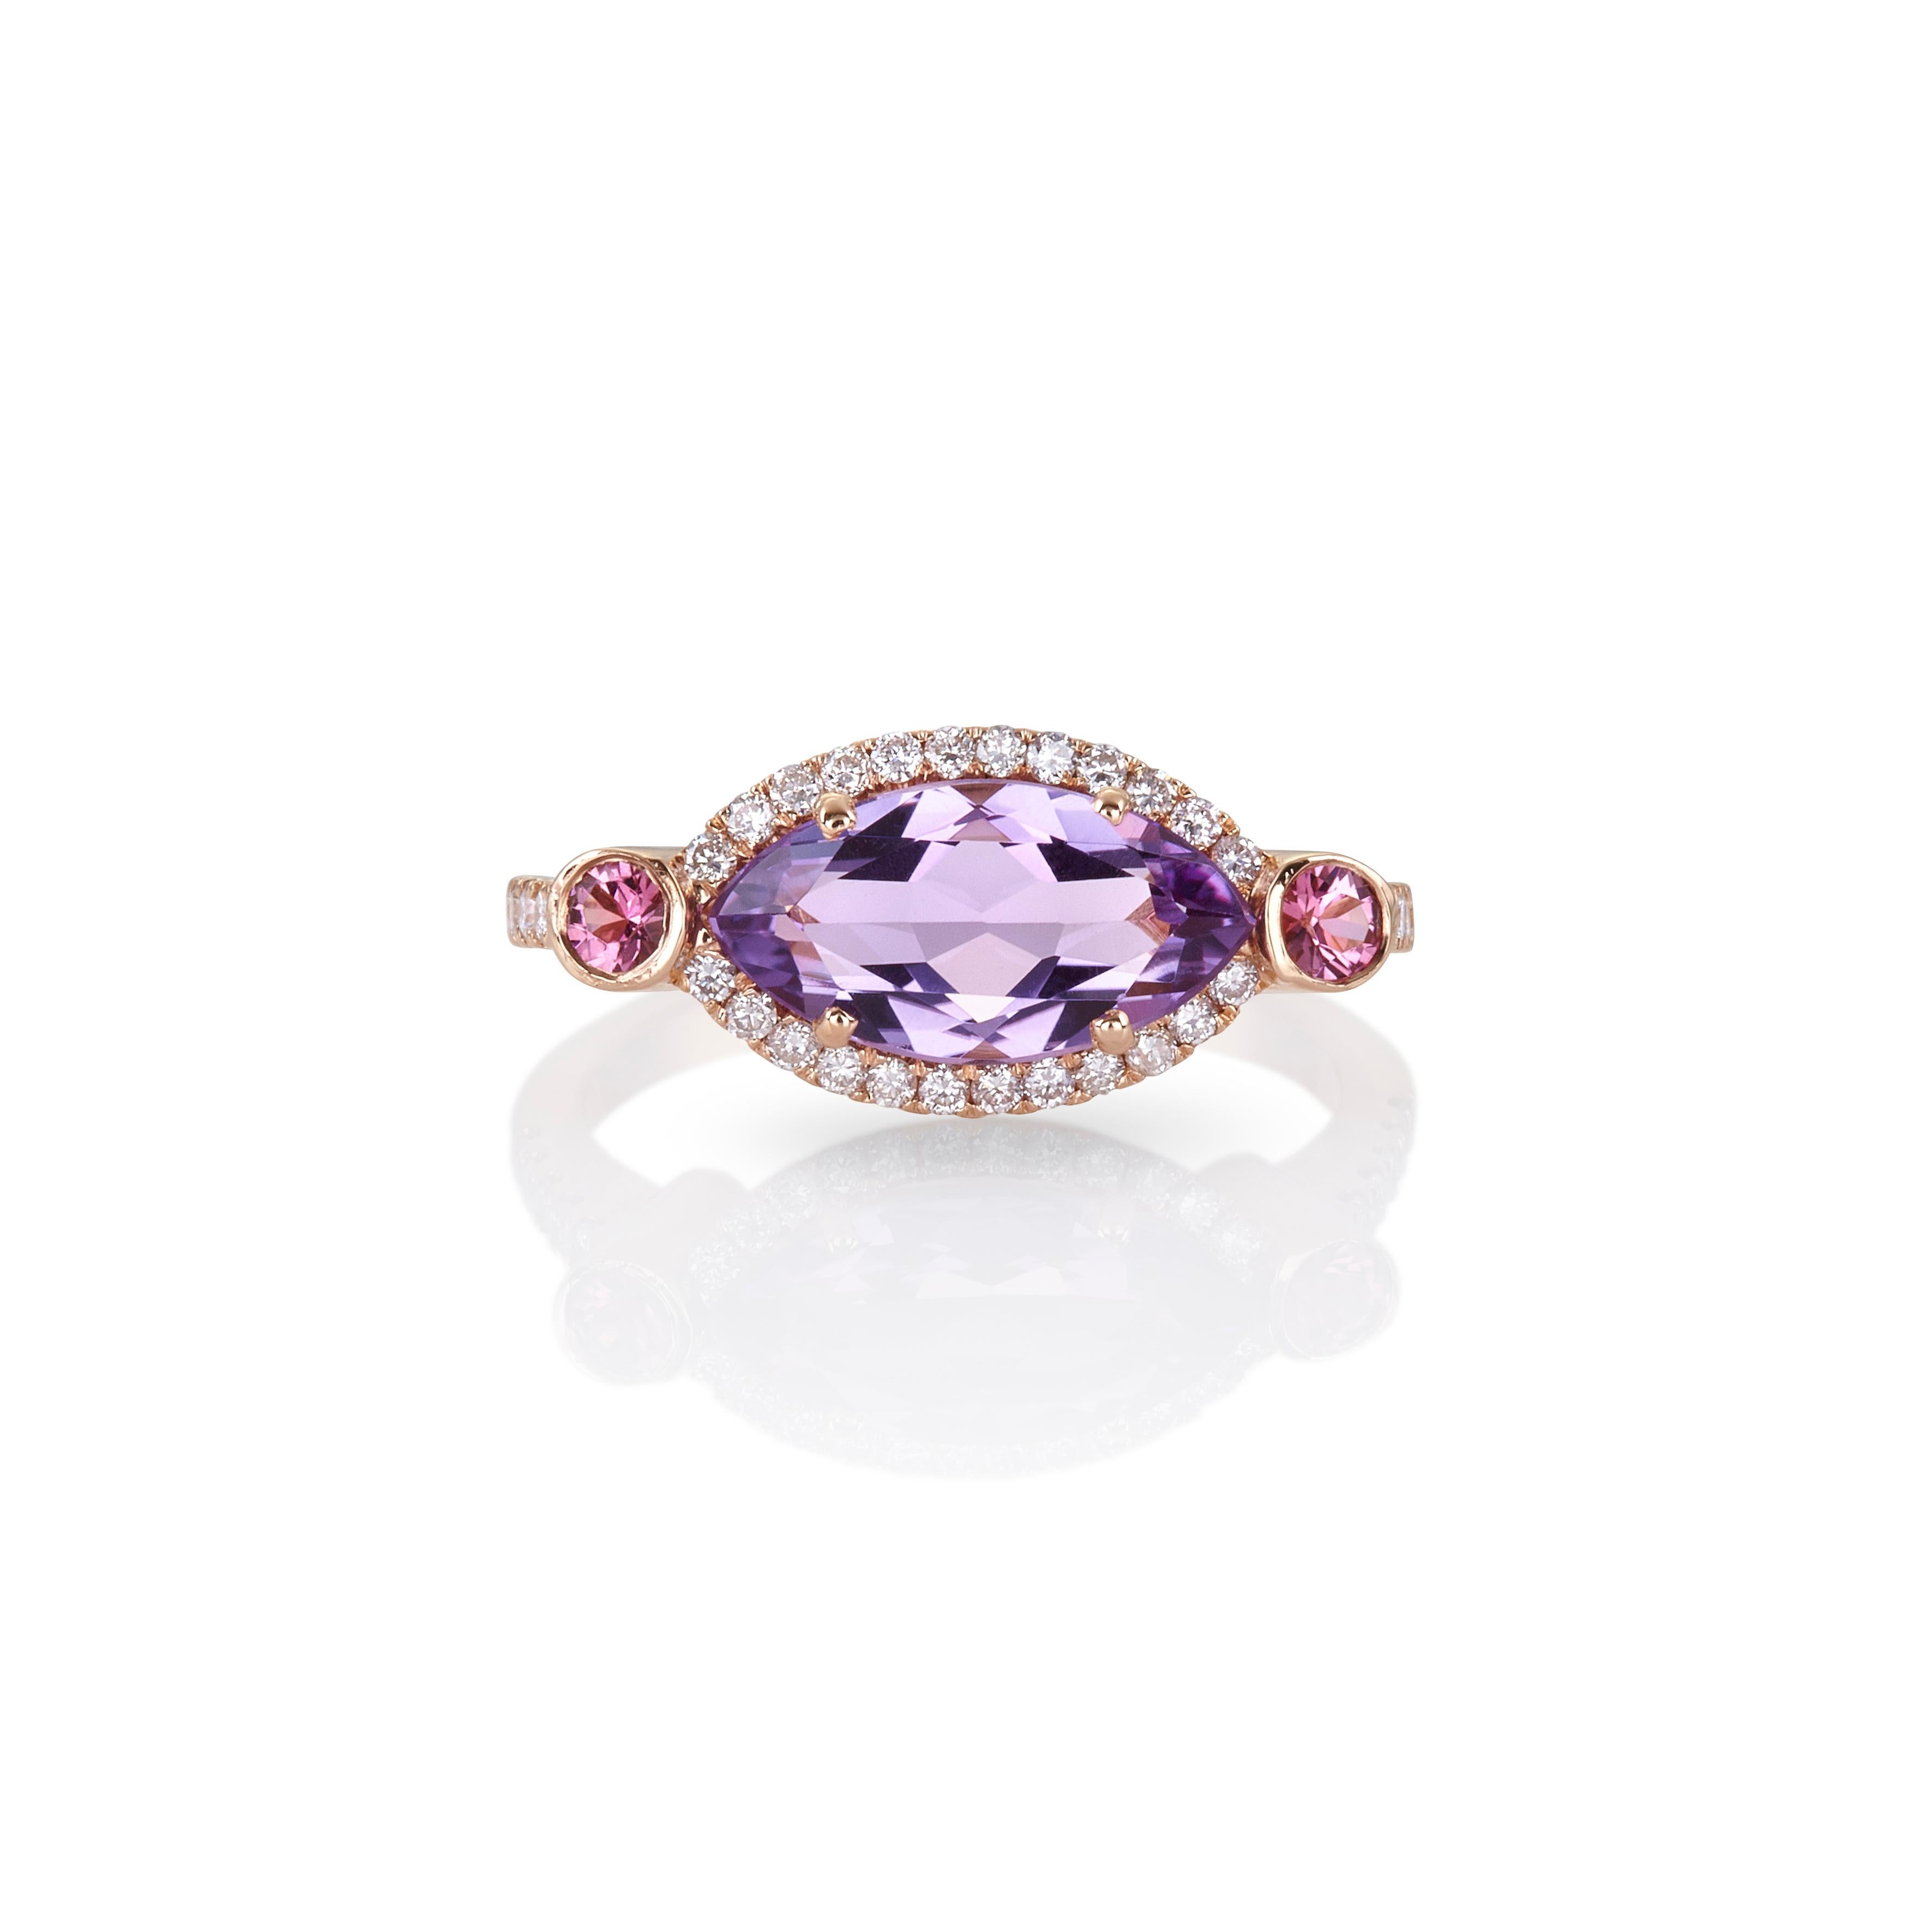 For Sale:  Marquise Amethyst Ring in 18kt Rose Gold with Pink Sapphires and Diamonds Halo 2